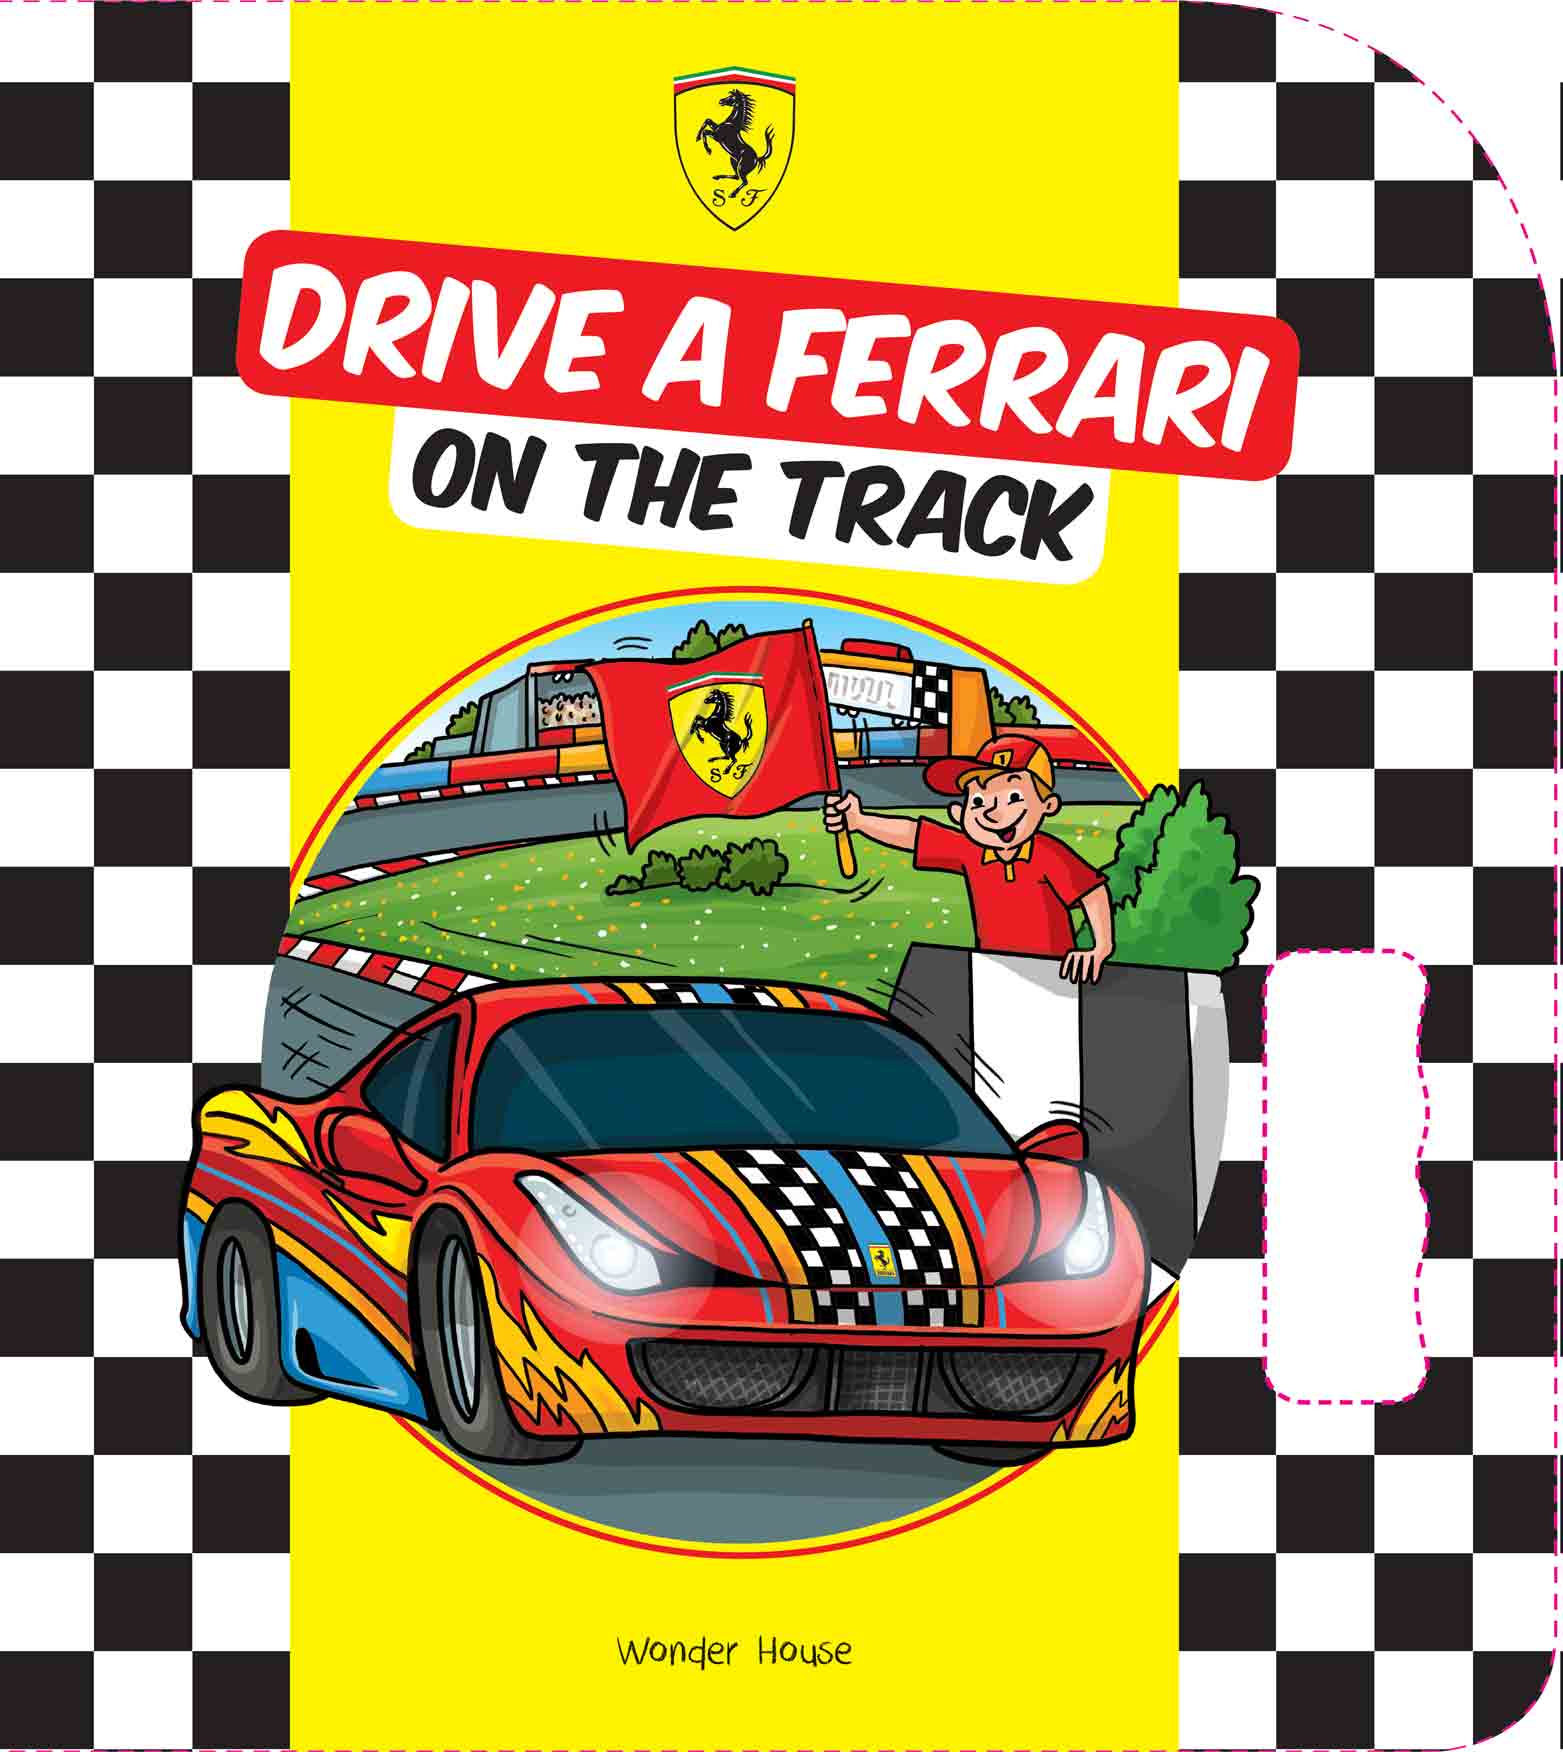 Drive a Ferrari On The Track: Illustrated Board Book For Kids